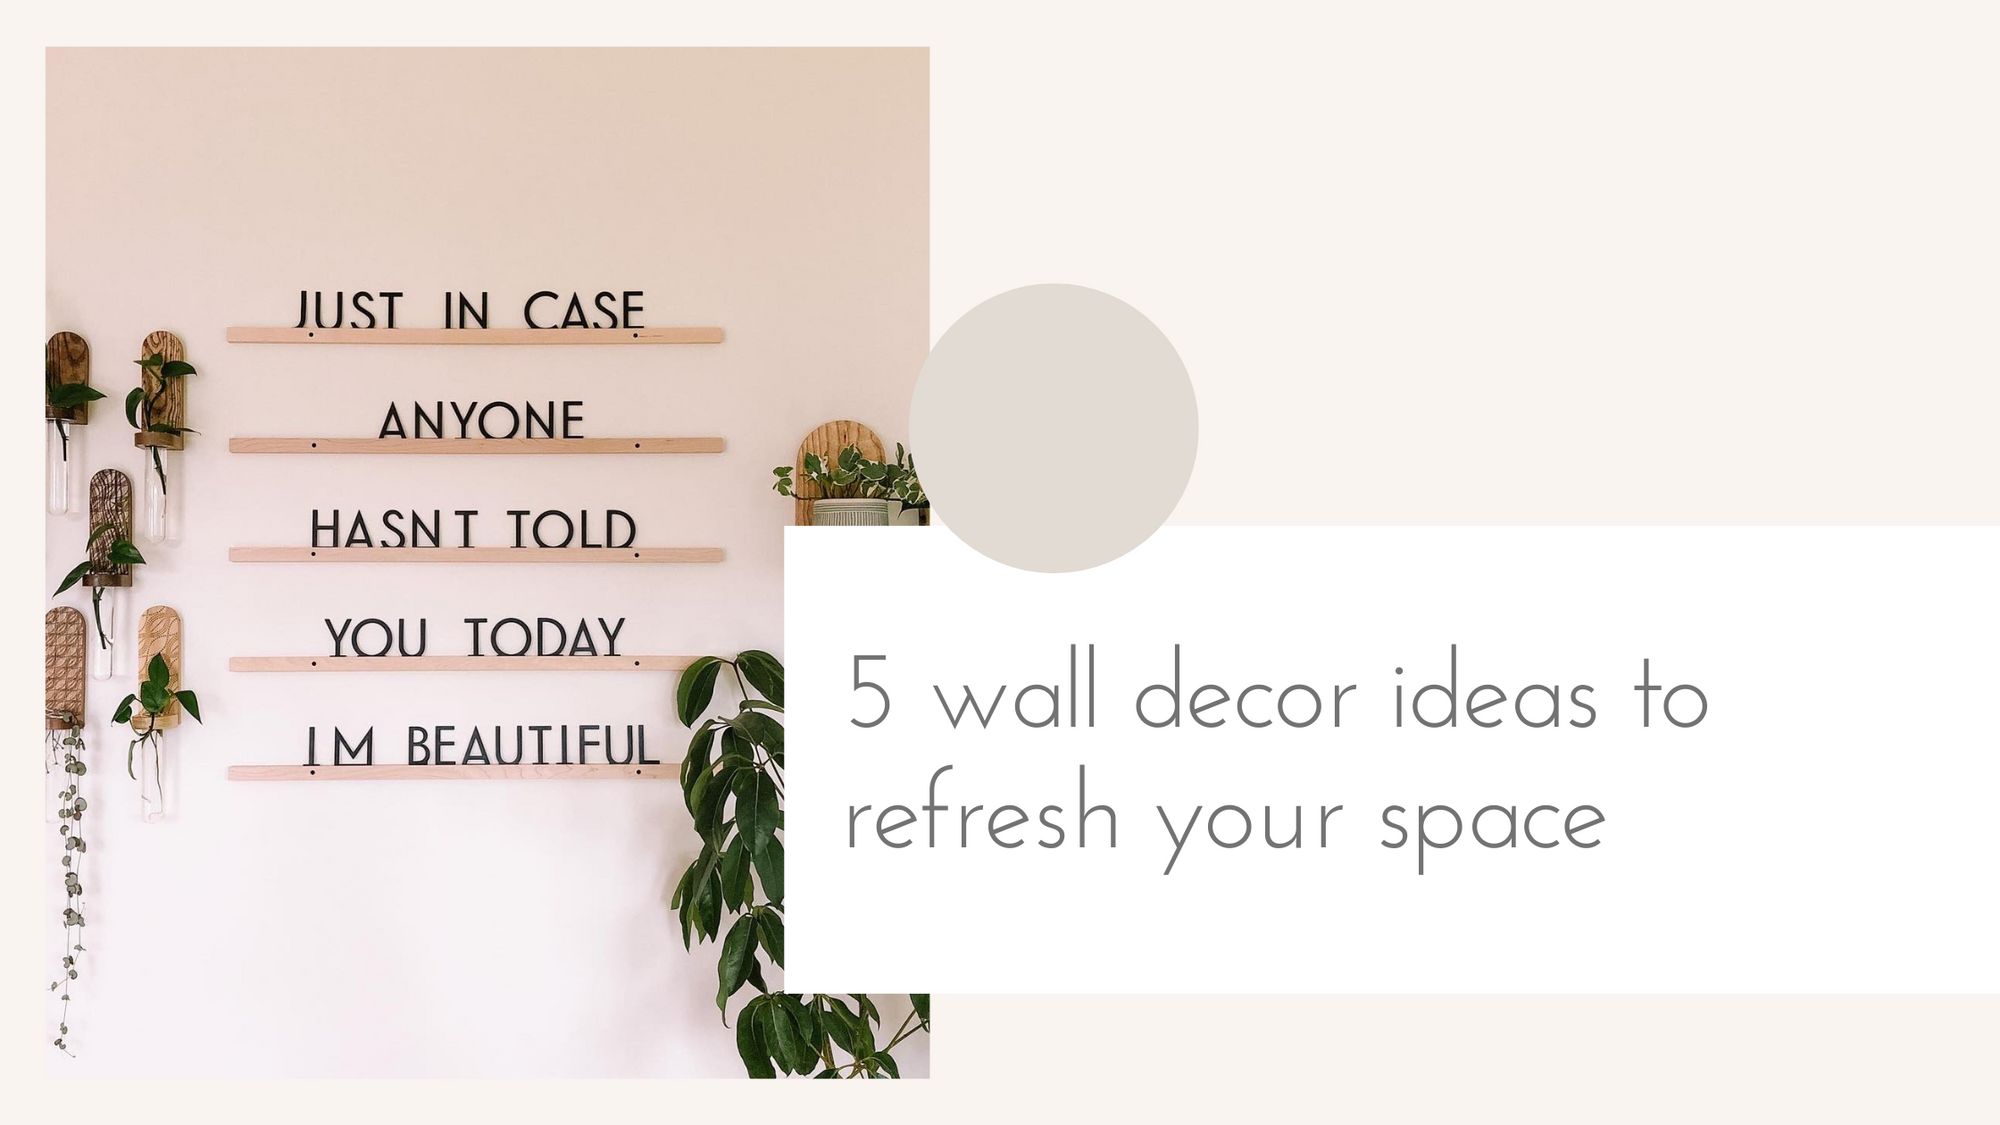 5 wall decor ideas to refresh your space